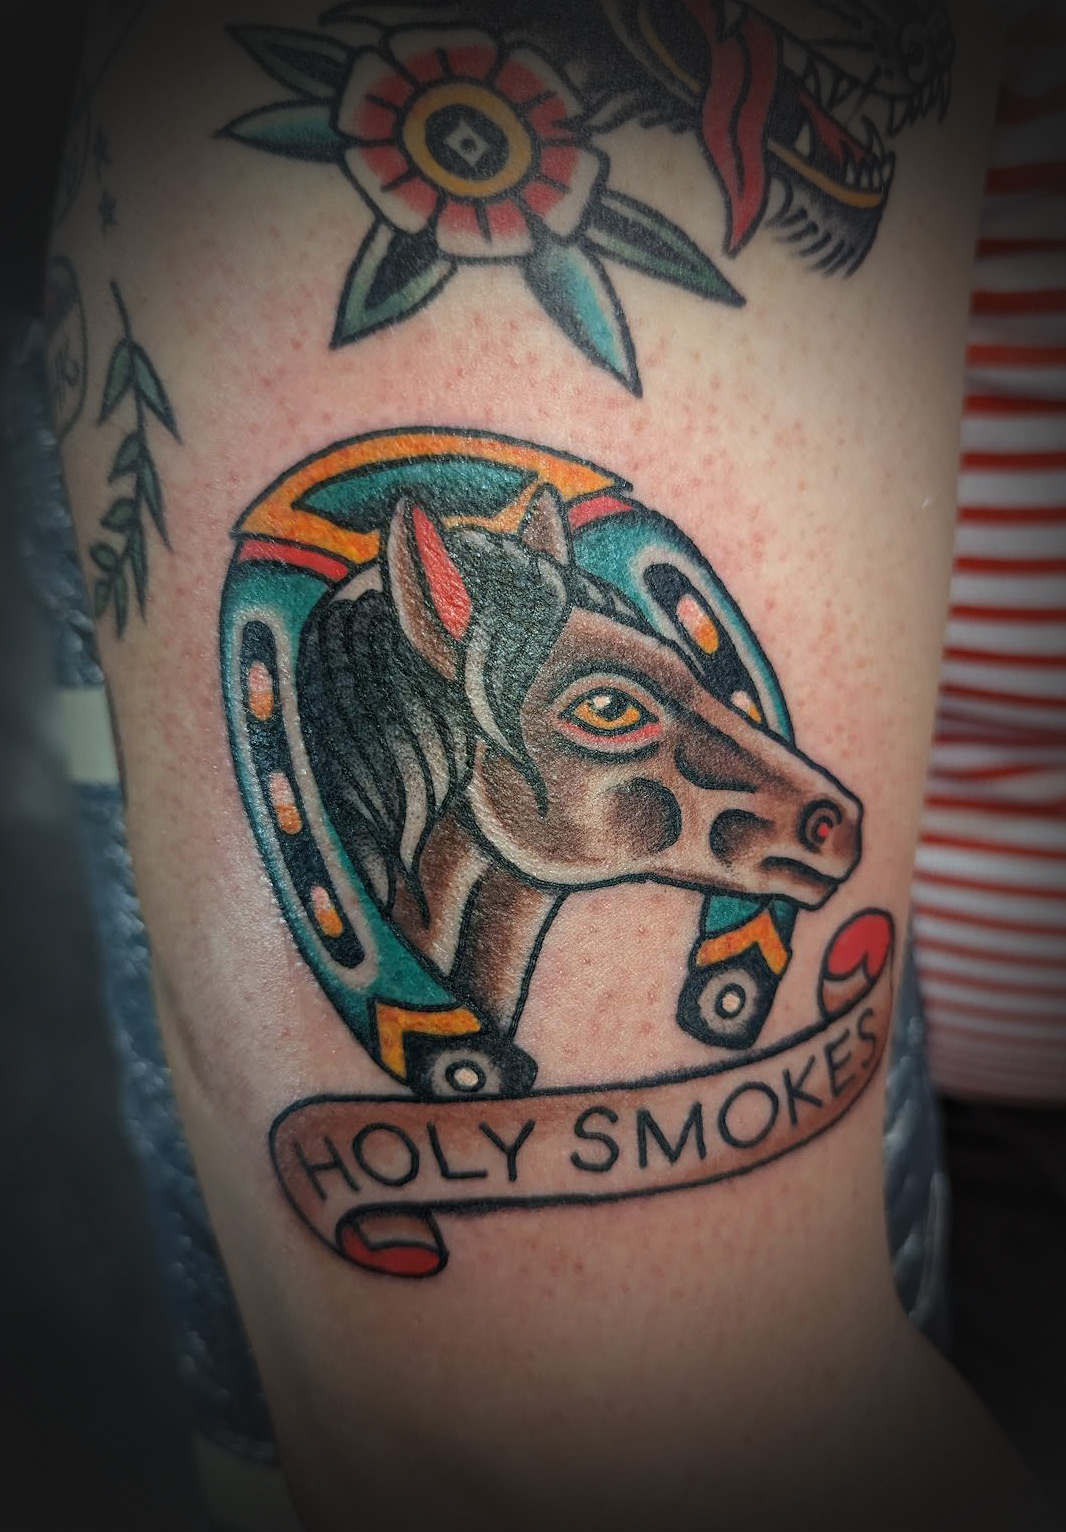 A tattoo of a horse with the words Holy Smokes beneath.